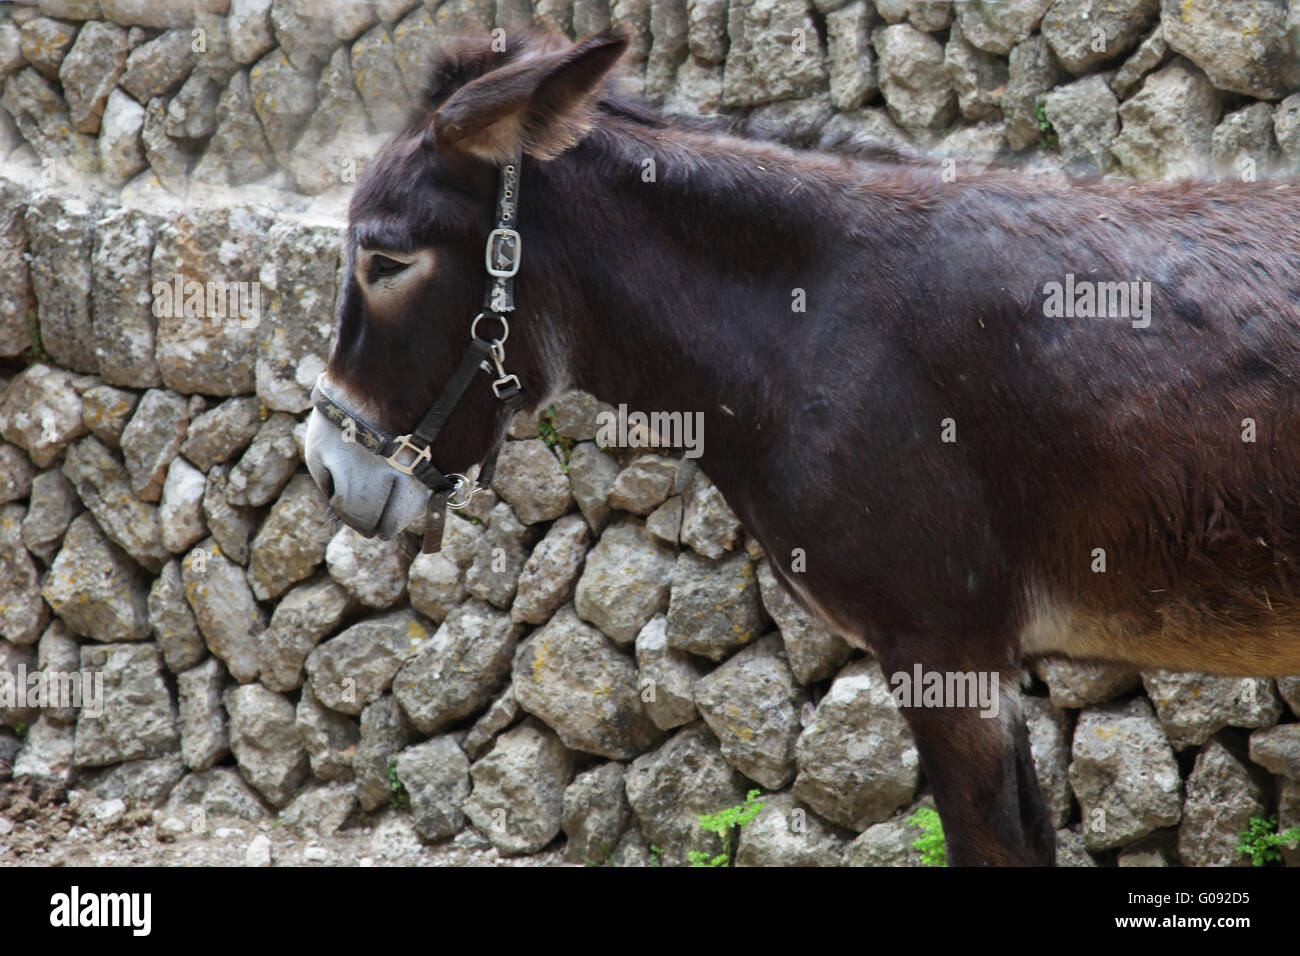 Young donkey in a harness Stock Photo